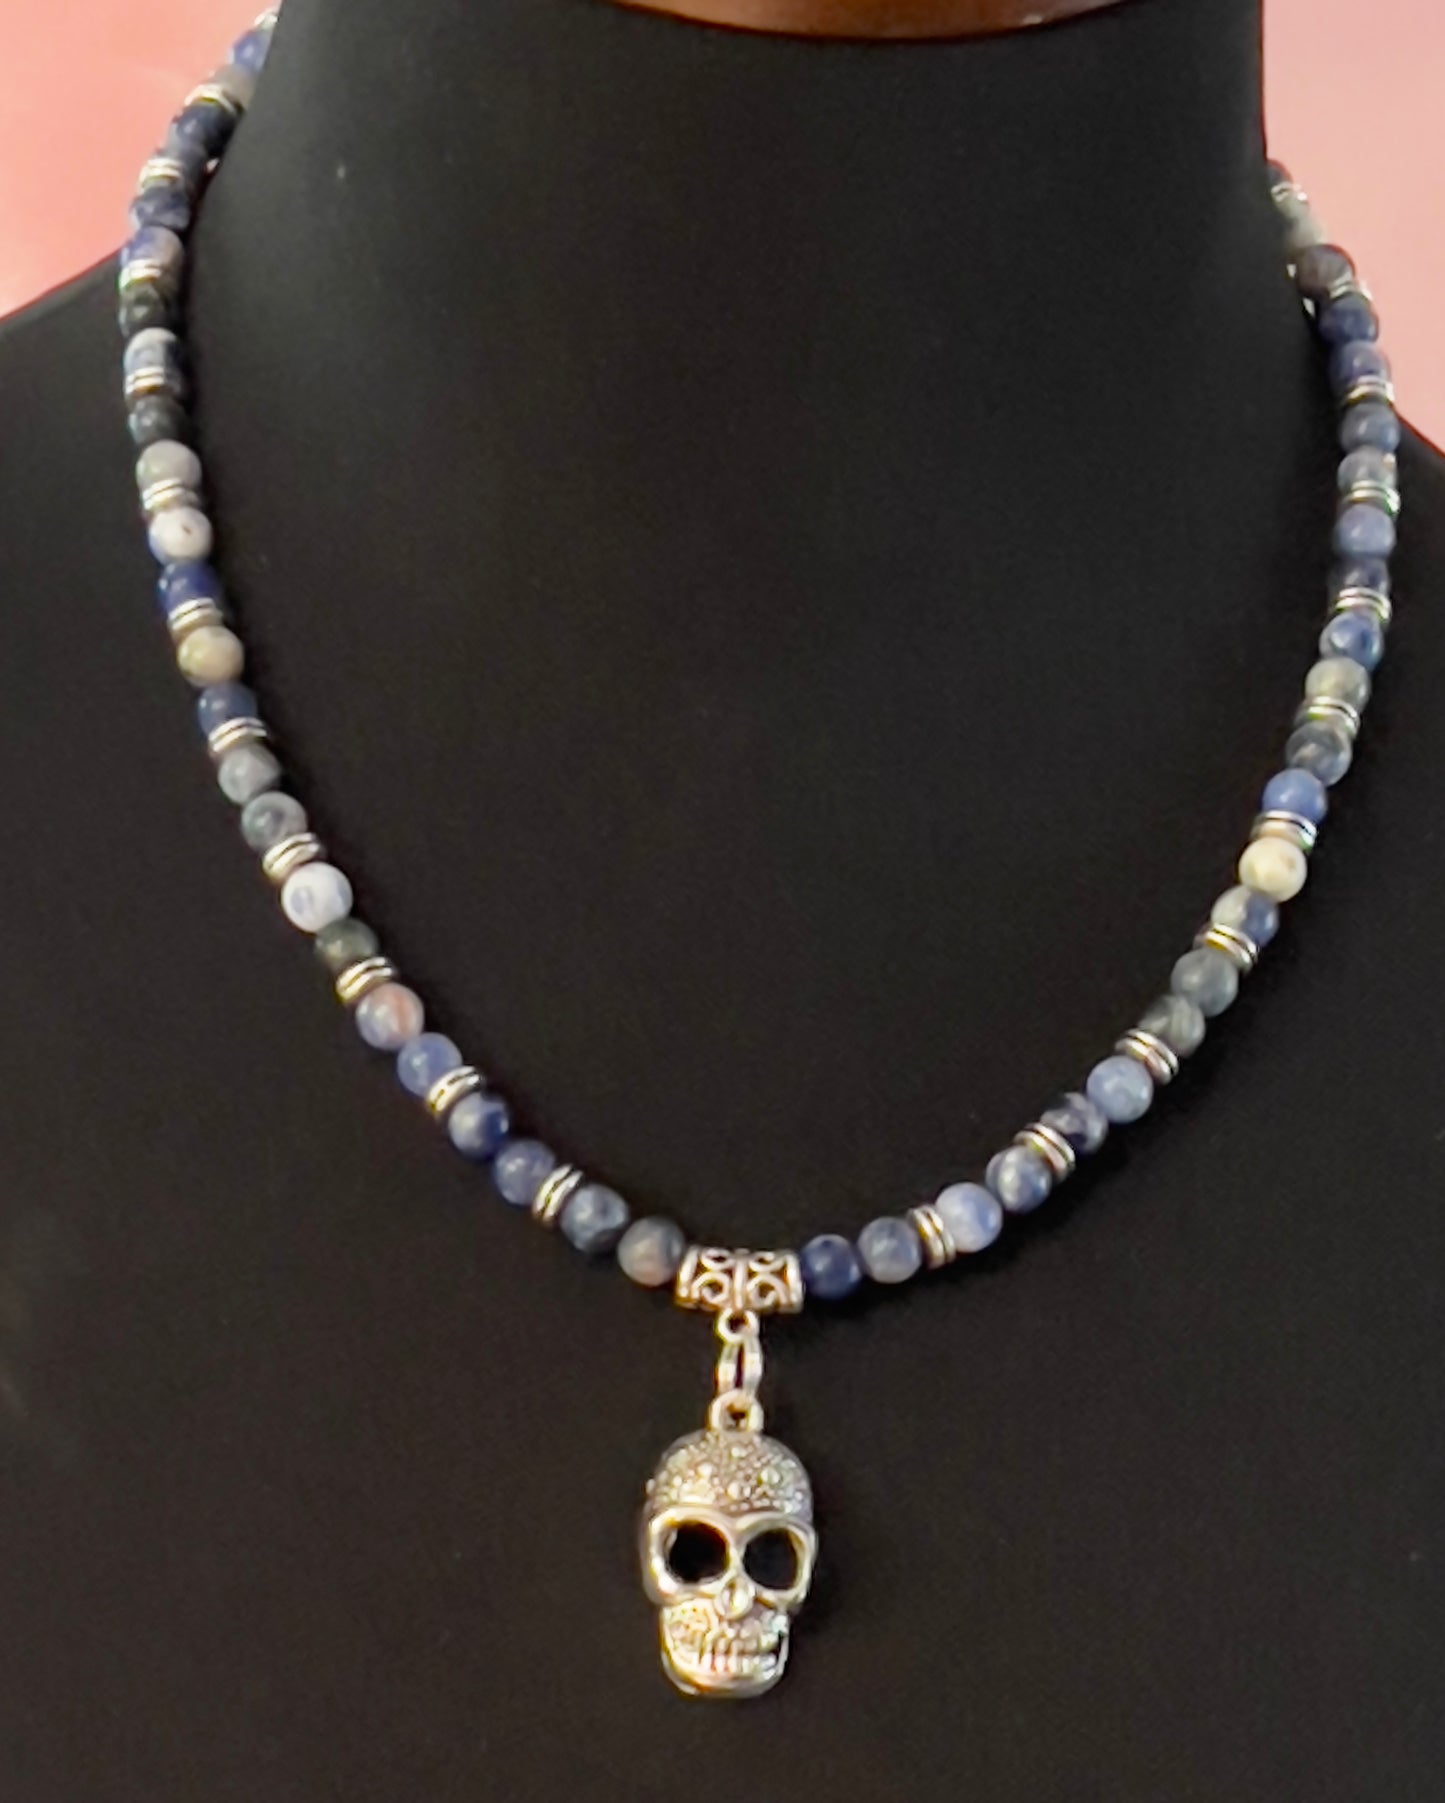 Mexican Inspired Skull Necklace with Natural Blue Sodalite Beads